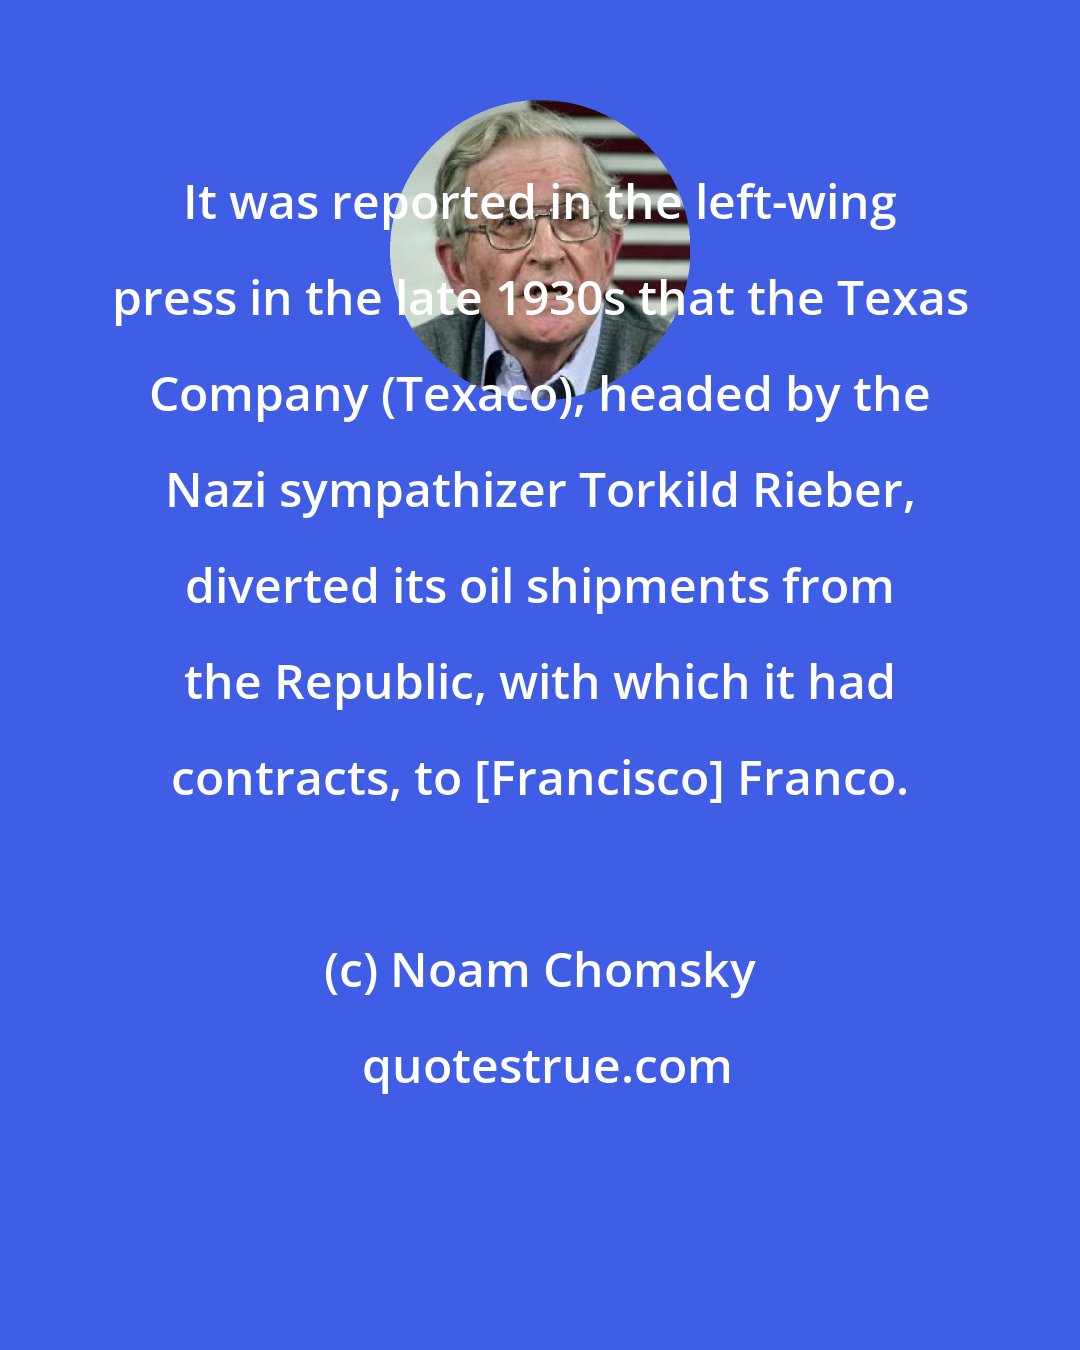 Noam Chomsky: It was reported in the left-wing press in the late 1930s that the Texas Company (Texaco), headed by the Nazi sympathizer Torkild Rieber, diverted its oil shipments from the Republic, with which it had contracts, to [Francisco] Franco.